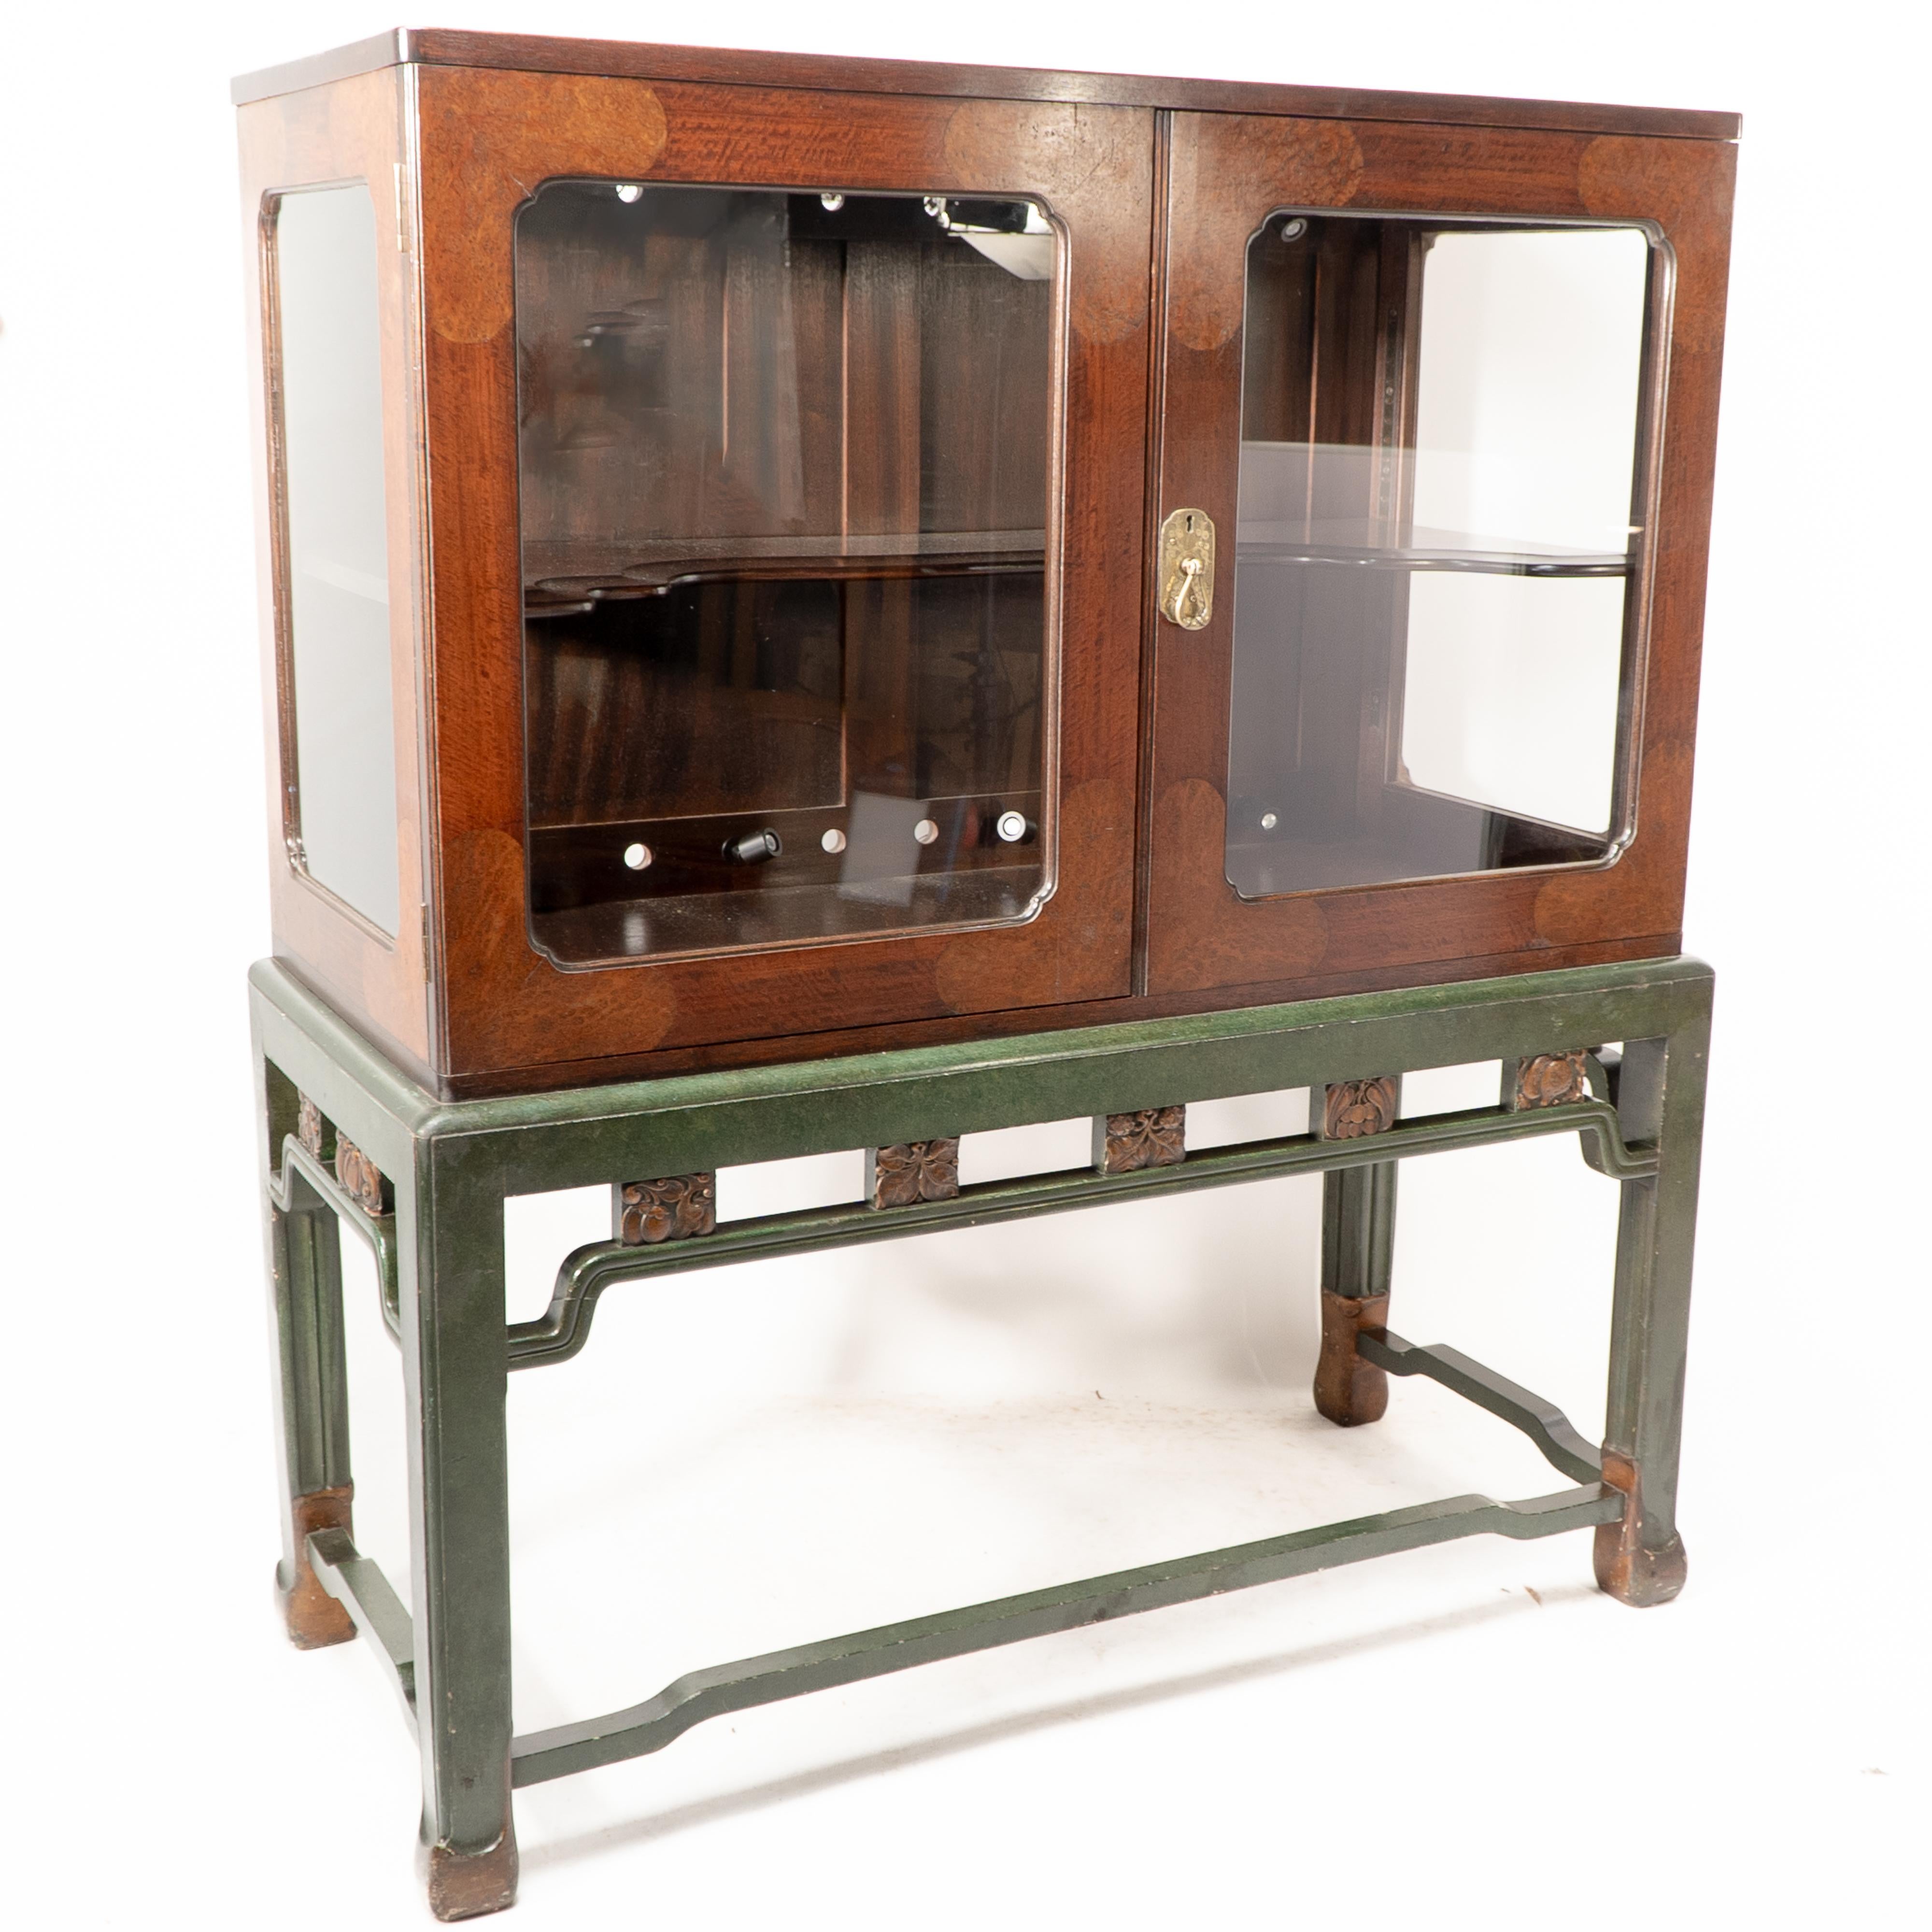 Sir Robert Lorimer attributed, for Whytock and Reid Edinburgh. An Anglo-Chinese mahogany and burr walnut display cabinet with green painted and gilded wood.Literature: Savage, Peter, 'Lorimer and the Edinburgh Craft Designers', Steve Savage 1980, p.